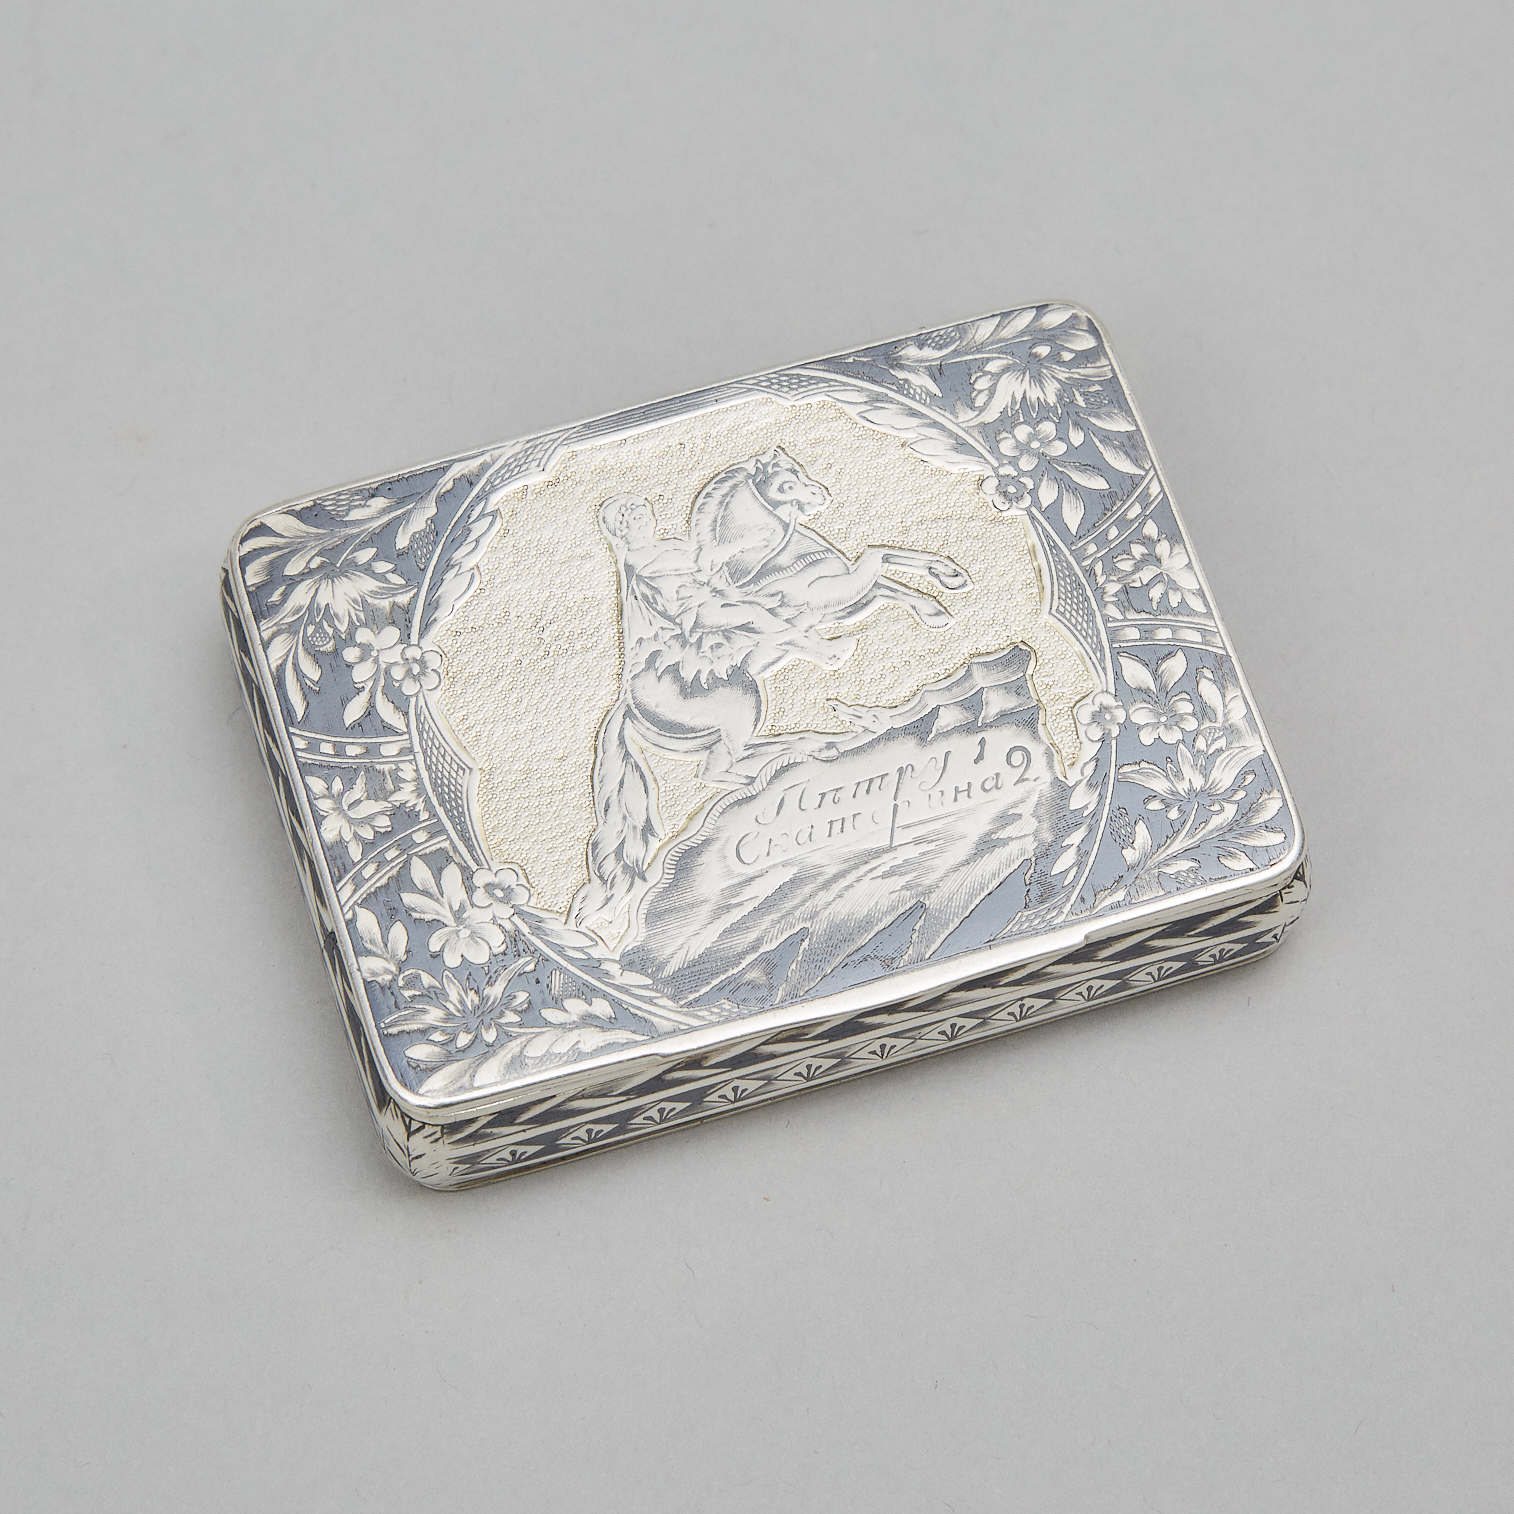 Russian Engraved and Nielloed Silver Rectangular Snuff Box, Moscow, 1824